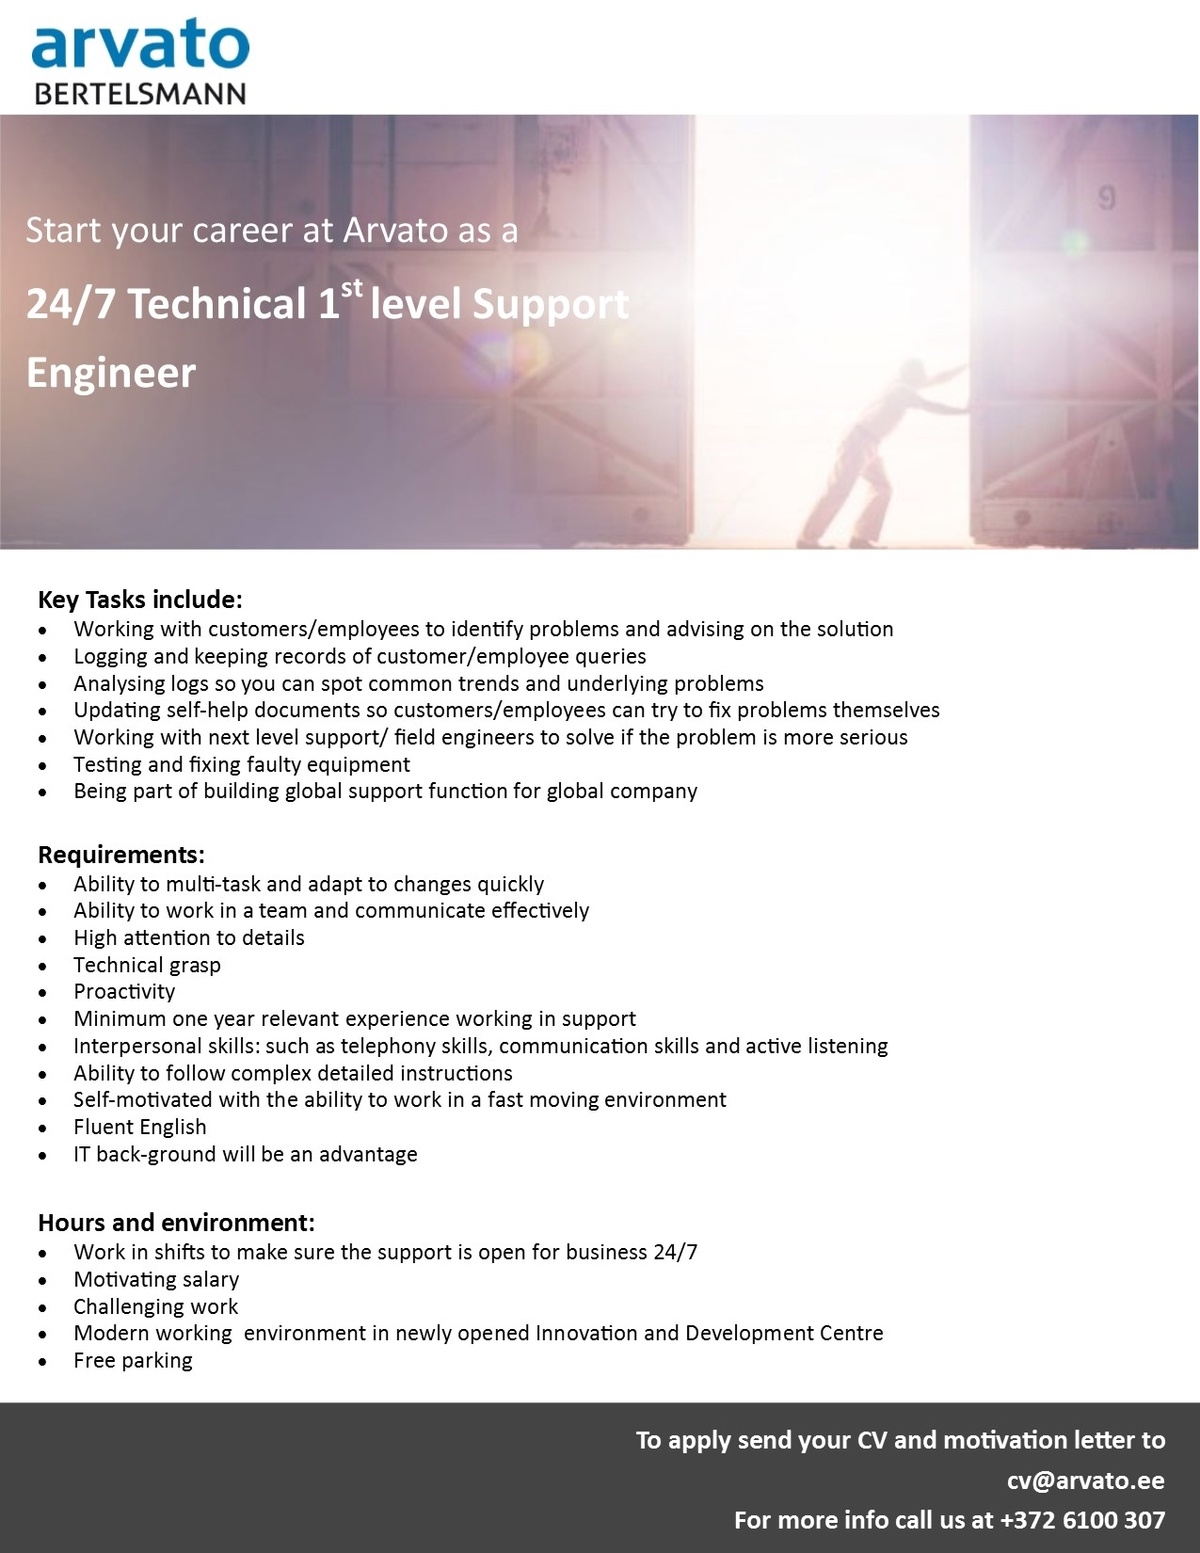 Arvato Services Estonia OÜ 1st Level Support Engineer